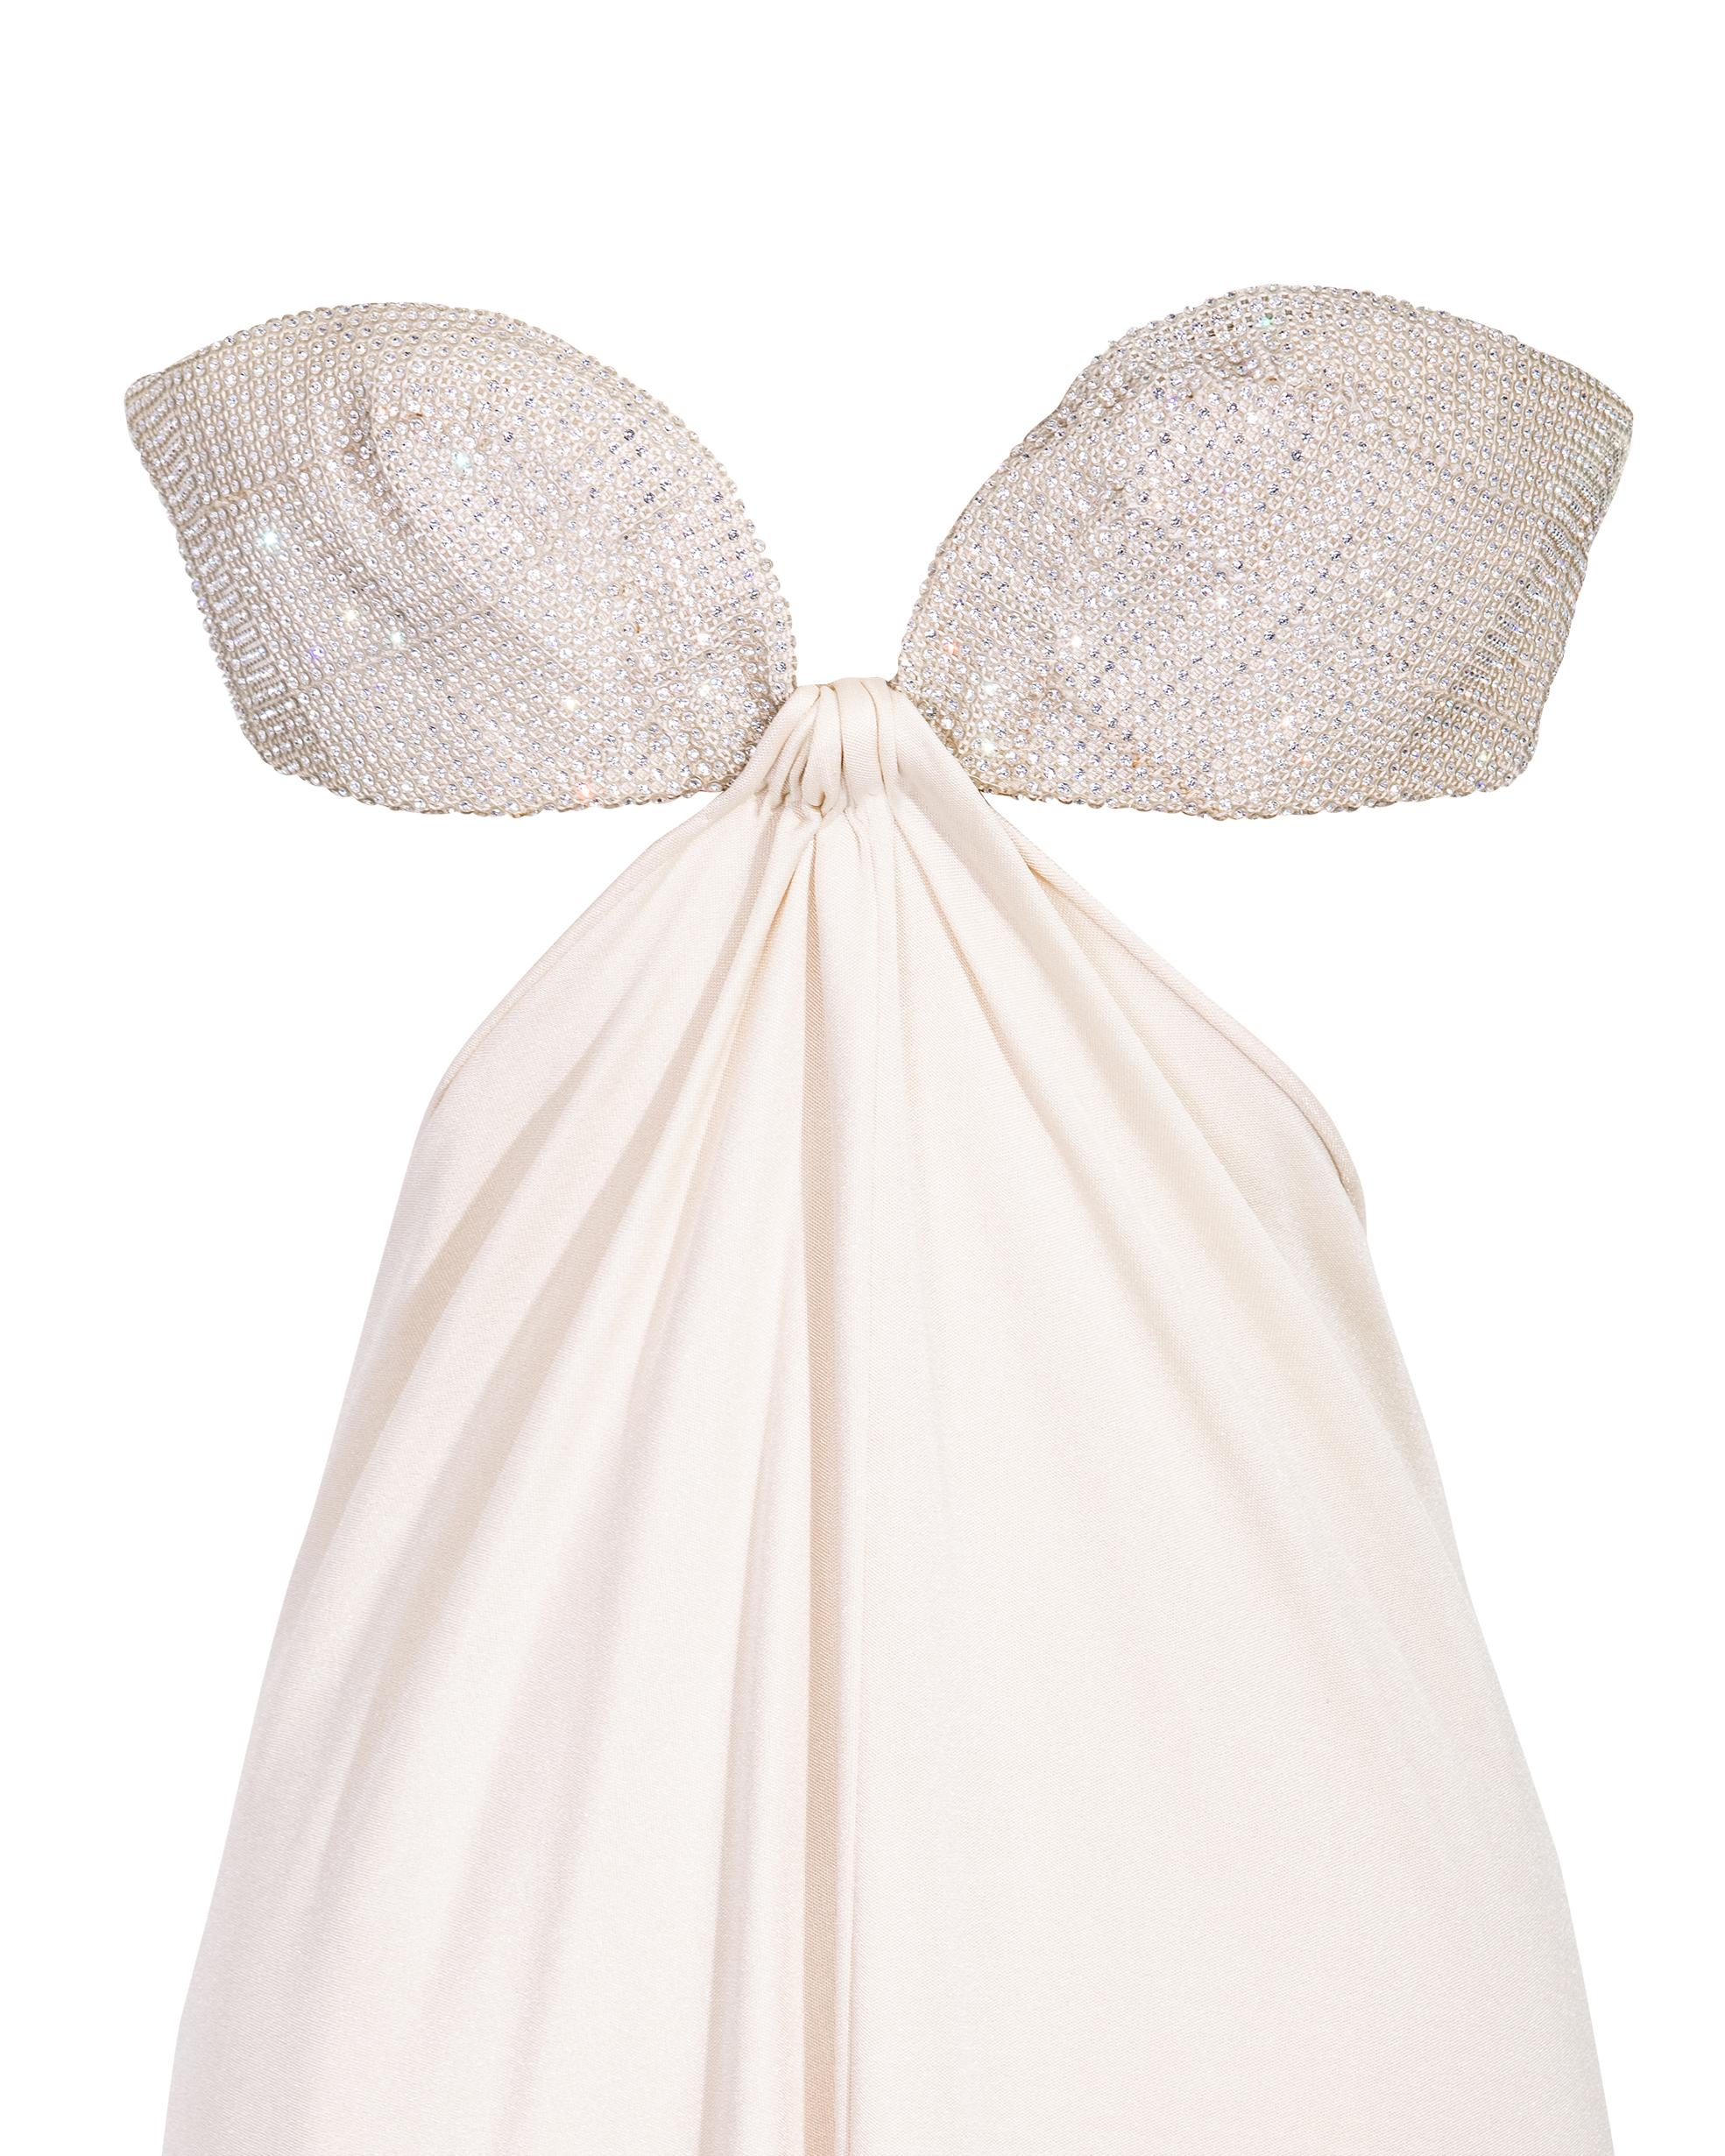 1978 Loris Azzaro White Gown with Crystal Cutout Bodice 4